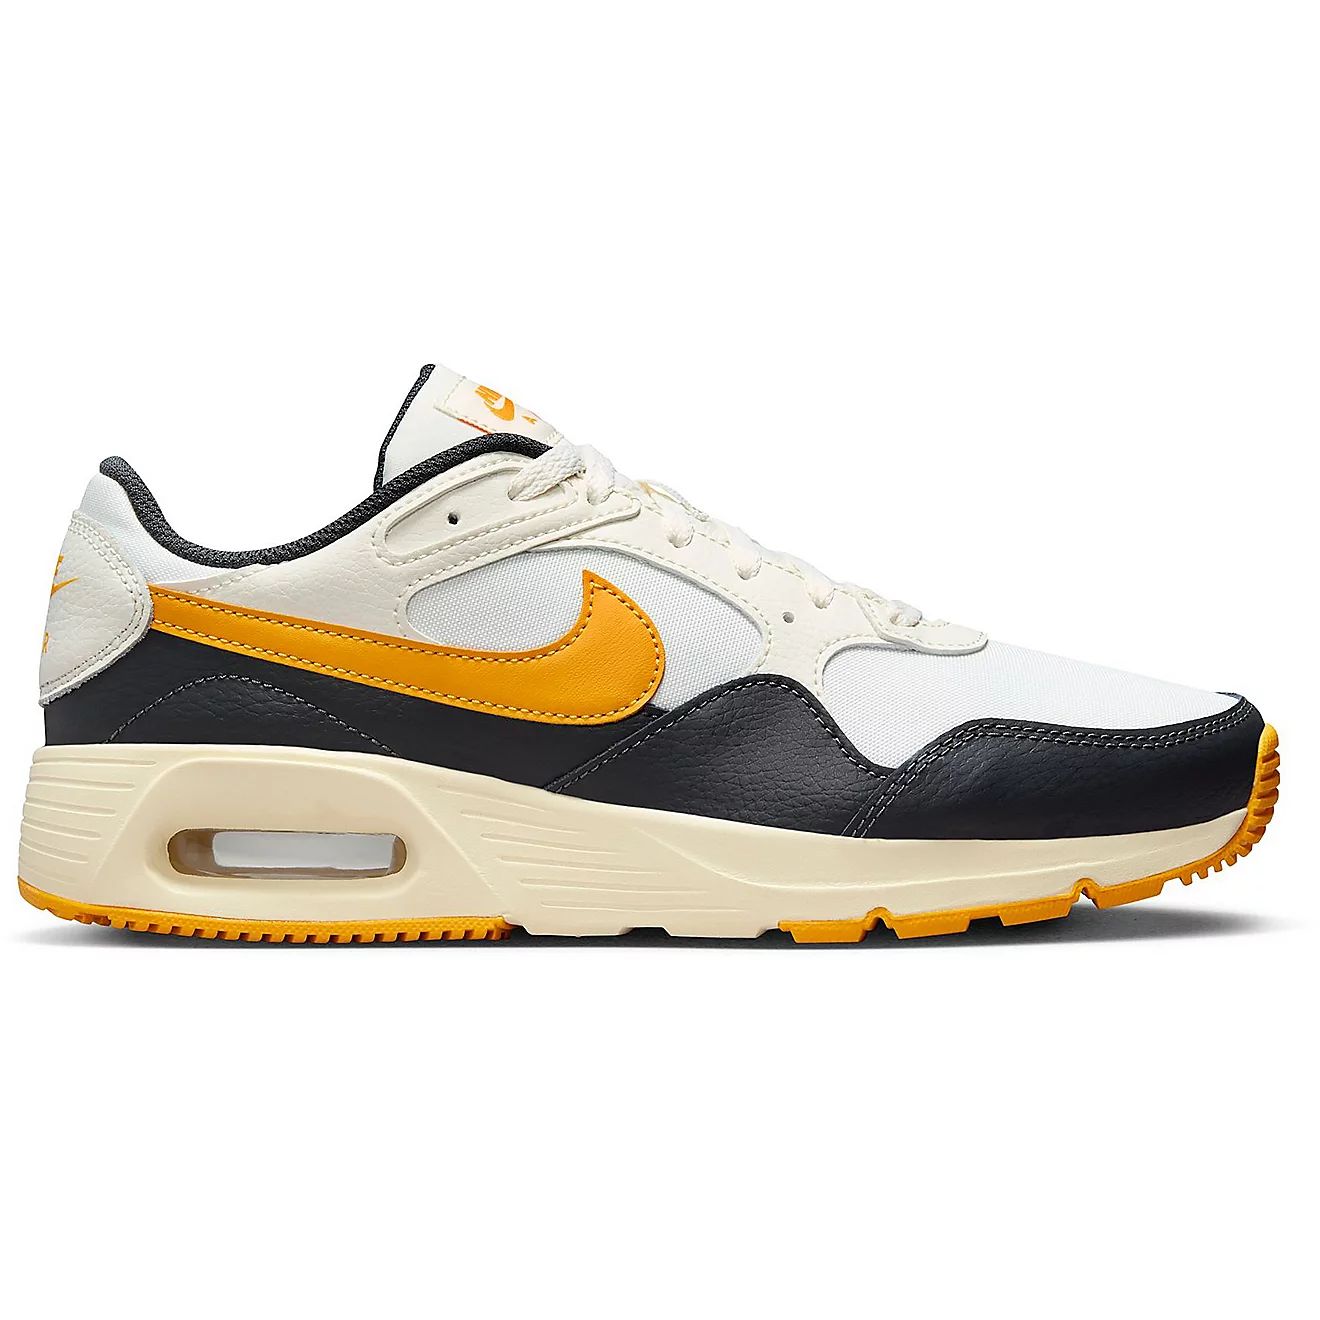 Nike Men’s Air Max SC Shoes | Free Shipping at Academy | Academy Sports + Outdoors